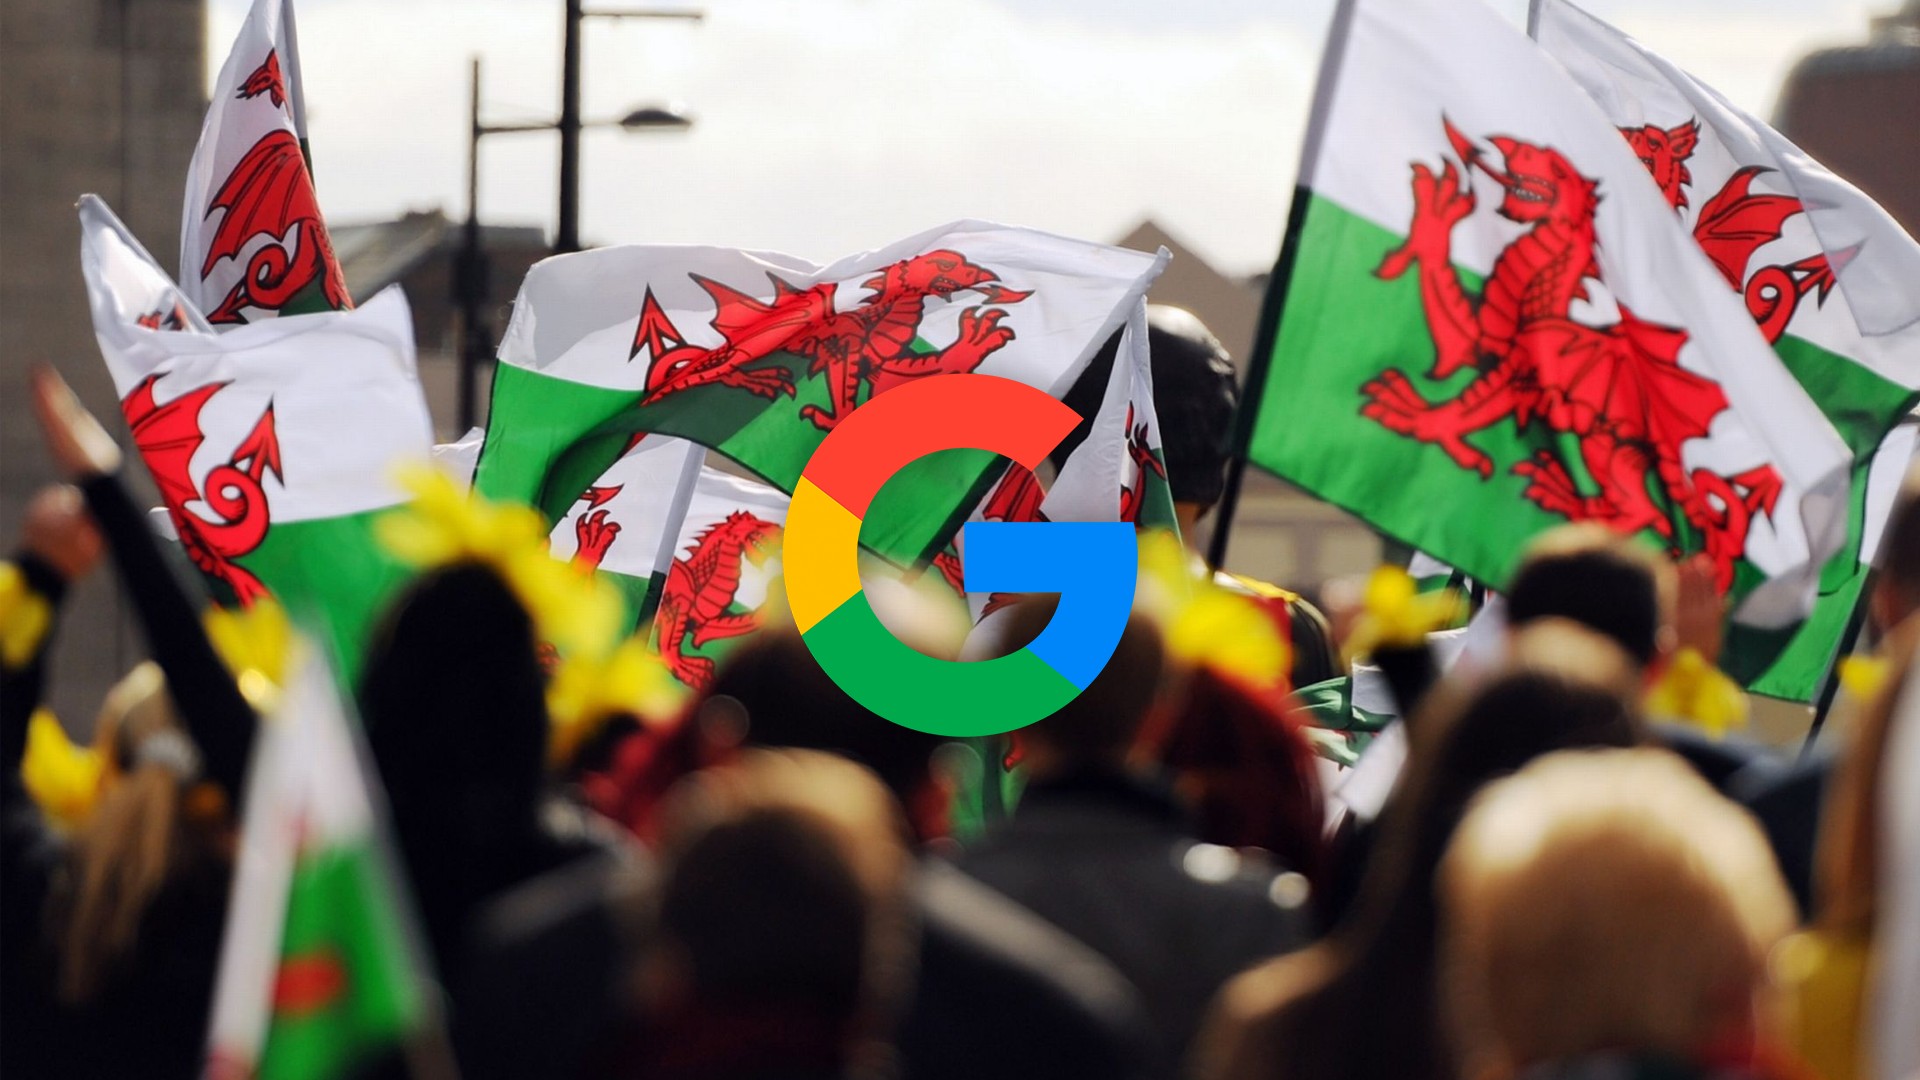 St David’s Day: Google launches Doodle to celebrate the date in Wales and England